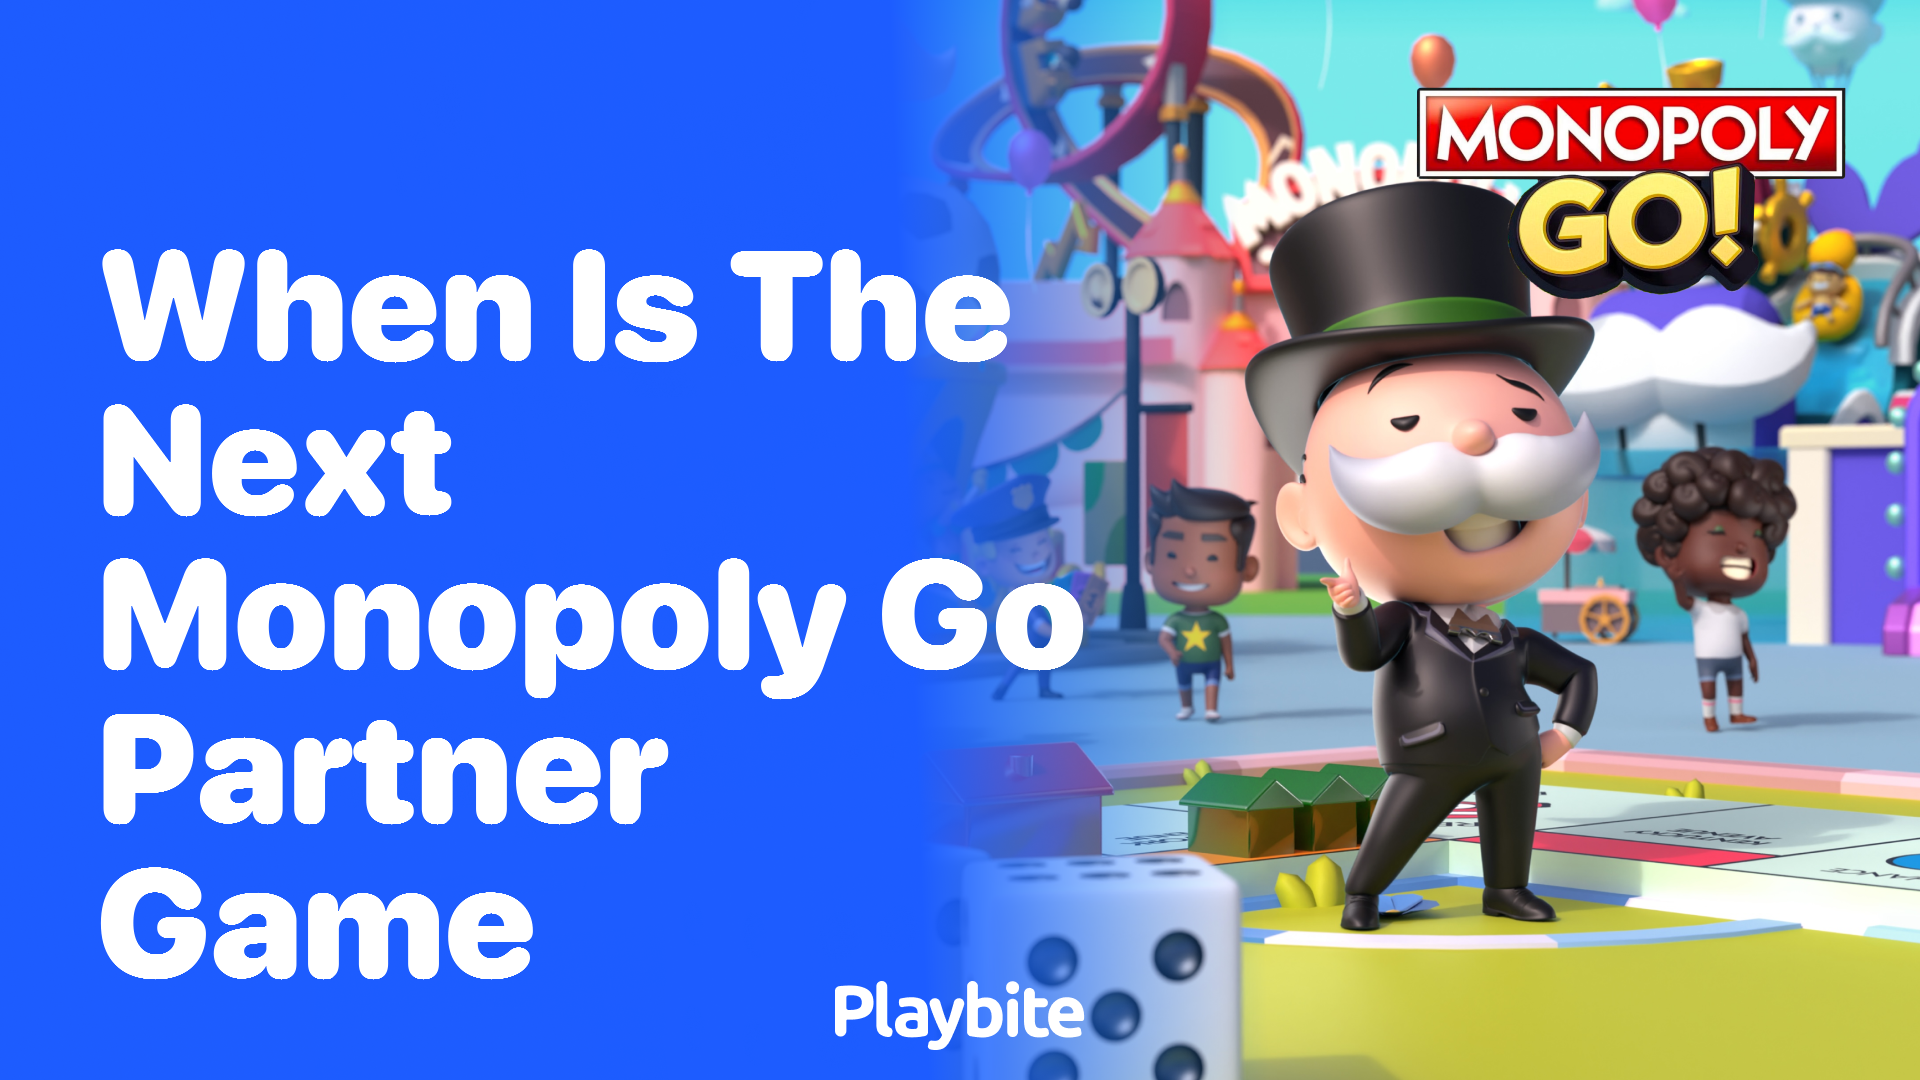 When Is the Next Monopoly Go Partner Game?